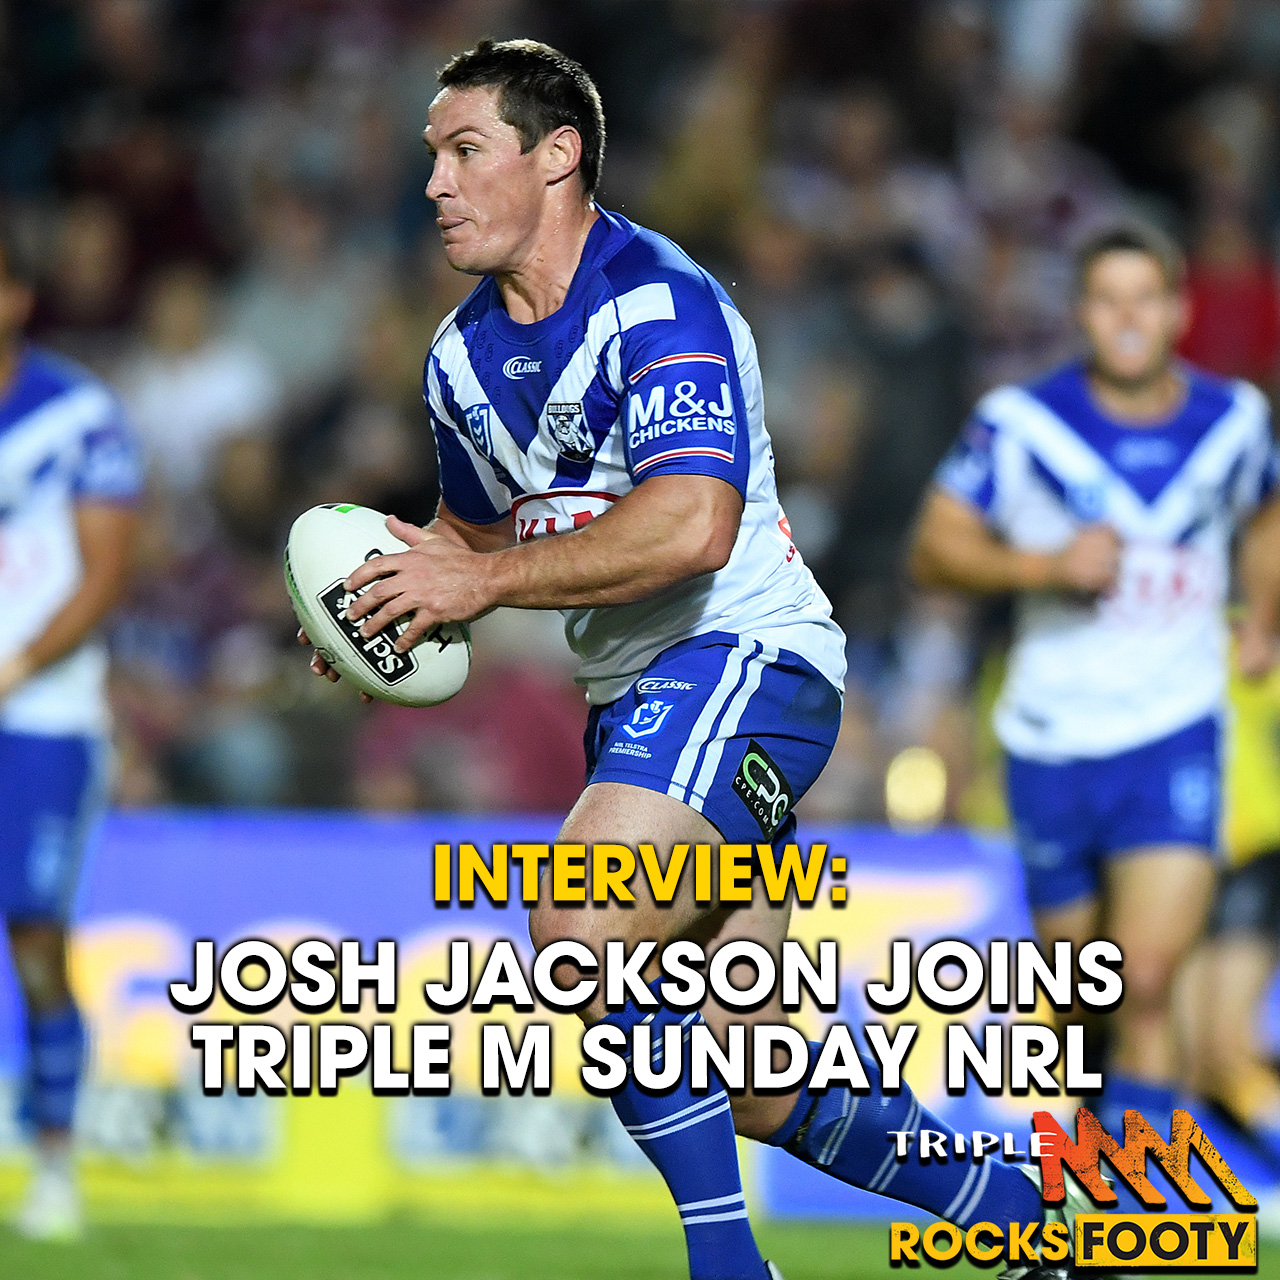 INTERVIEW: Josh Jackson Joins Triple M Sunday NRL Following The Bulldogs' Win Over The Panthers